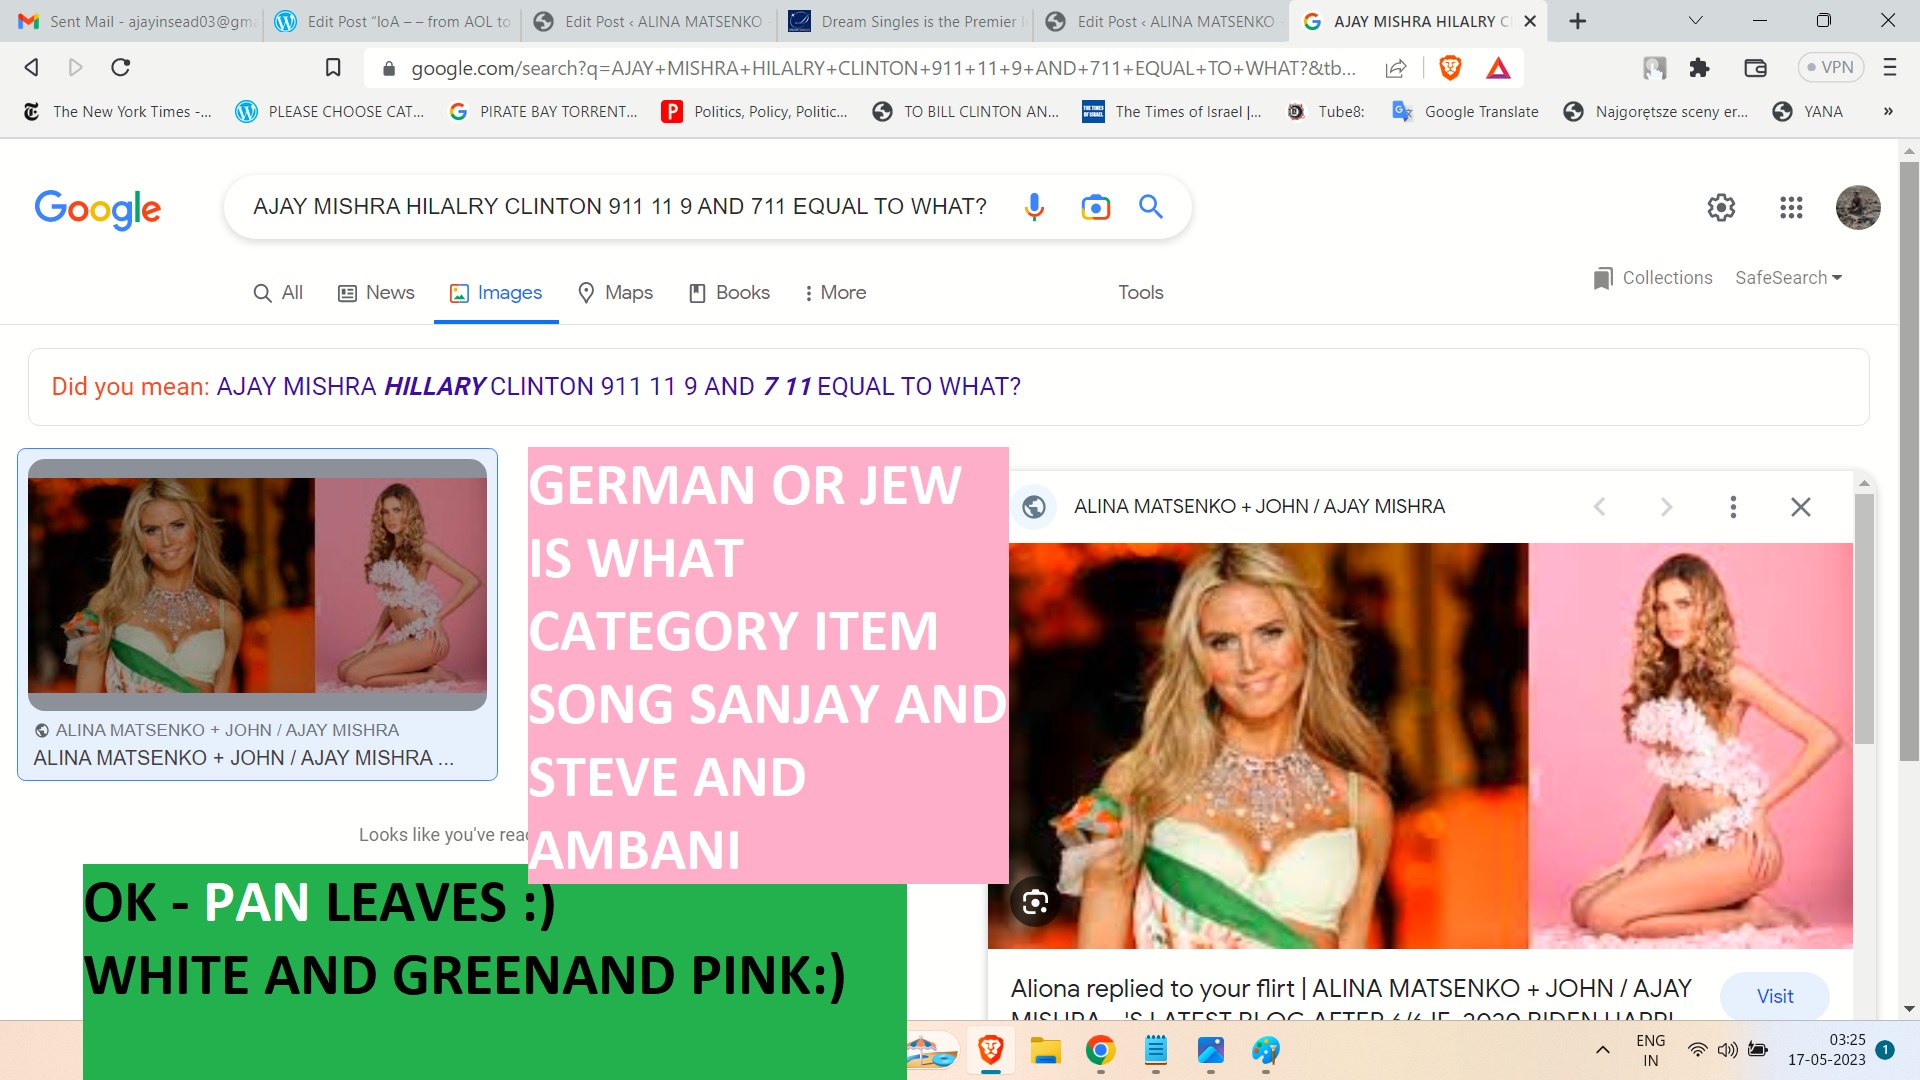 FROM THE DEAD SONEI TO HER ICON AND IDOL HILLARY -> []1 U WENT TO DIAN ;S FUNERAL - NOT MINE [2] U SAI 711 - GANDHI AND GASOLINE OR PETROL MEANS ? KATMNADU AND ALINA [3] HECE - BEYONCE GAFFI SHITAMBANI AND 711 ? SPETRRY COMPARES TO AJAY MISHRA HILARY LLCINTON - 9 11 AND 11 9 AND 711 EQUAL TO? -> PS: IN LUCKNOW THEY WORSHIEPD U AND AMRMATMEPLE AND 6 - I KNWO HE IS NOT STAR - BU T IS HEEUL TO ZERO RO NEGATIVE? - SO CONTRBUTIN S OF SION FO 3RD WODLD SHIT ND ┬аMAHTAM GANDHI MADARHOF TO 6 CONTIENIEN EUAL TO MROE TA GERTER THAN ANDLSS THAT OF ALL MEN ALL STRS FROM ┬аKENNEDY TO MODI TO BIDNE ? IS CALED :) HILALRYJI UWLL BE PREISNDET IF THERE IS REINCRANATION OF :) AJAY MSIGR AND VBILL CLINTN ALLWOED TO SPEAK IF NOT SPEECH TO YOUR SHIT ┬аLOWLY IN EVEN NETWROTH COMOAED TO JAJAY - LET ALONE IN BRAINA DN BRAWN - IS THIS UNCELAR TO U HILLLARY ? CAN U SPEAK LIEK AJAY ┬аDES AND D AND CAN ┬аWELL UCAN IF? YEAH THE ICON OF THE EJWS - JES MAADRHDO EHARD WORD YONI? - SO, TAHTS THE ANSEER TO RESOLVE ALL EMANS ALL EMANS ALL - EBVSU E AMAM- MRONING NIN 6 CONTIET CAL CNETER AND 711 ACCENT - ATCLLY EH DOENT HAVE ┬а7 11 ACCENT OK BARACK - ┬аSO, HIILARY - HE LOEVS U - NOT JST U KNWO HIS GDOS GOD THE BILL :) ┬а Thanks in Advance,┬аSincerelyAjay┬а